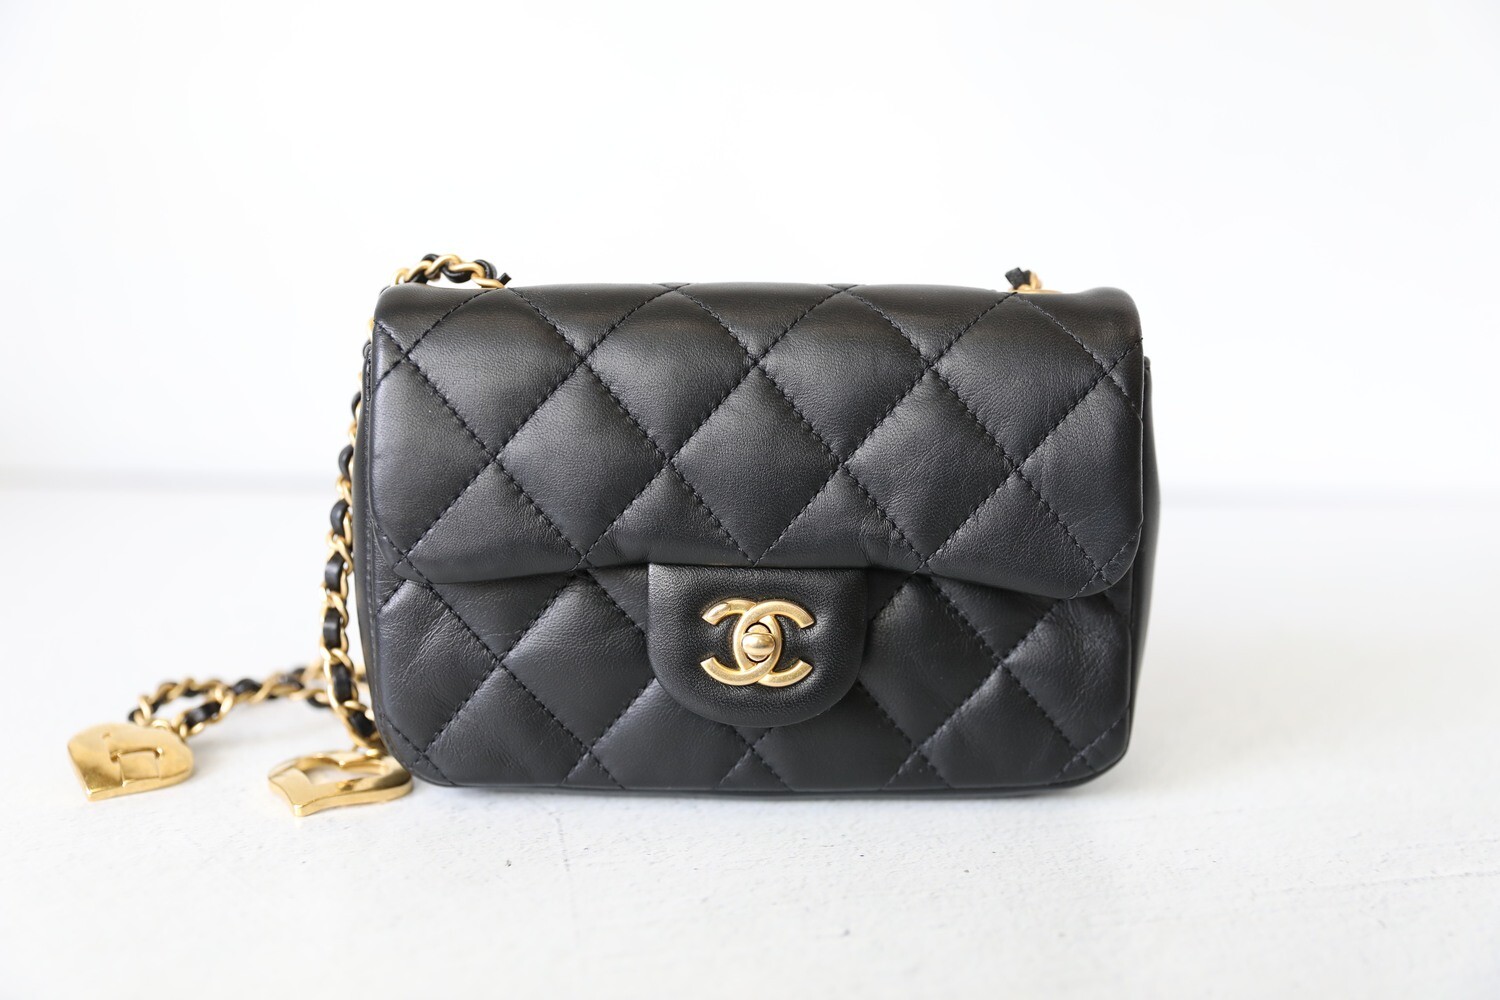 Chanel Seasonal Flap with Heart Chain, Black Leather with Gold Hardware,  Preowned in Dustbag WA001 - Julia Rose Boston